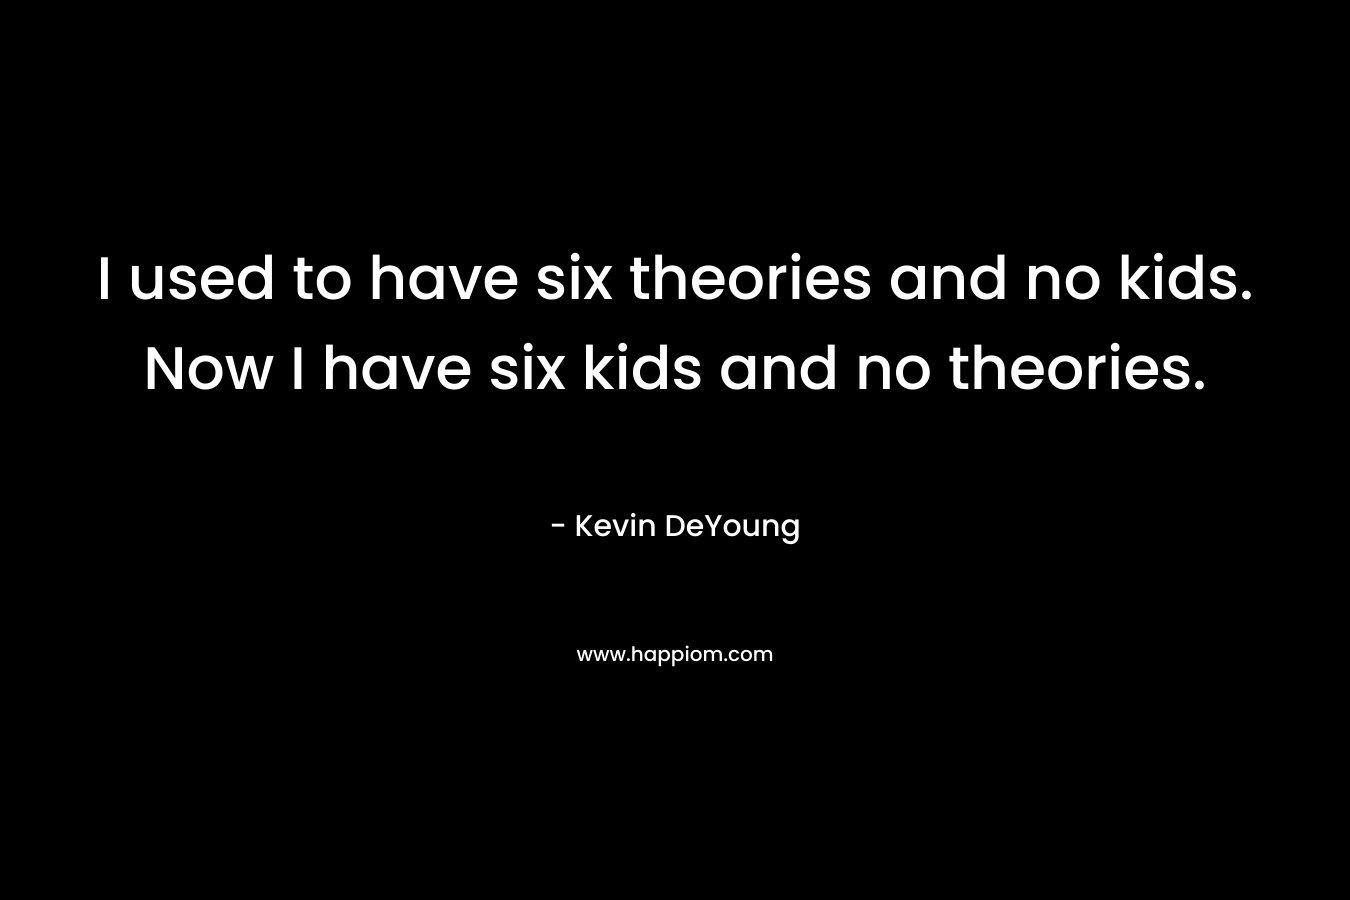 I used to have six theories and no kids. Now I have six kids and no theories. – Kevin DeYoung